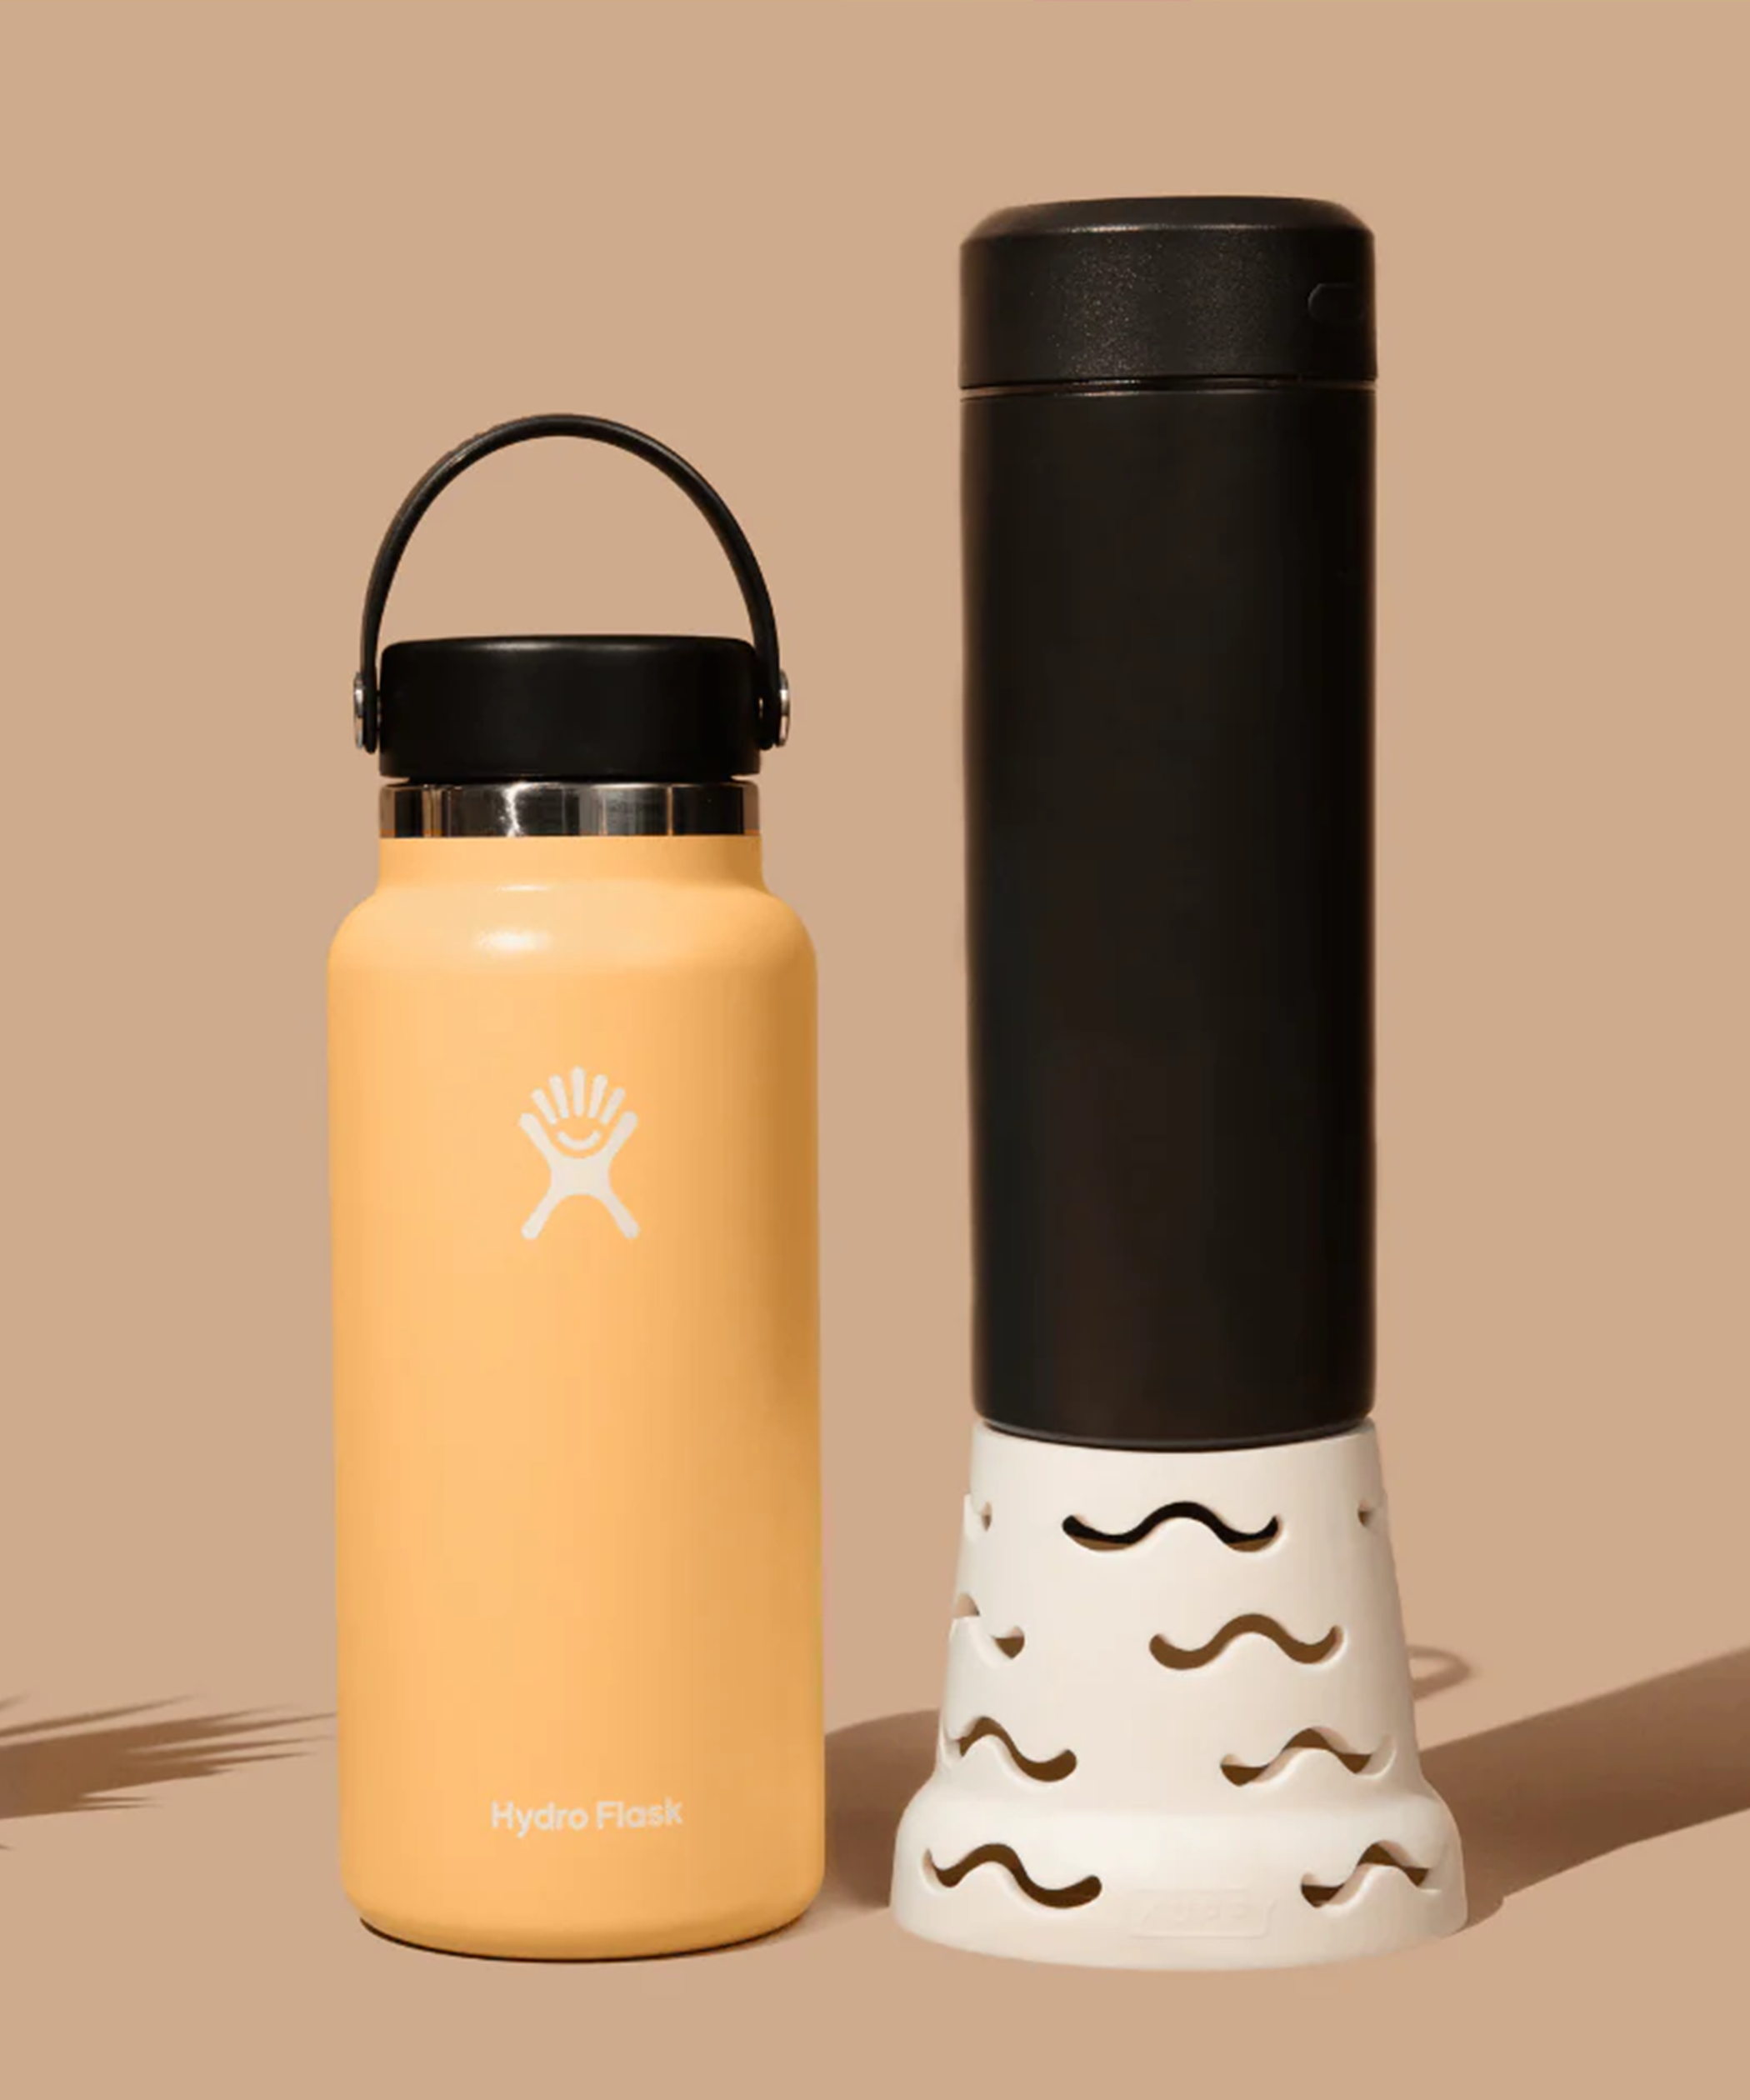 Hydro Flask Wine Bottle and Tumbler Review - 5 Things You'll Love